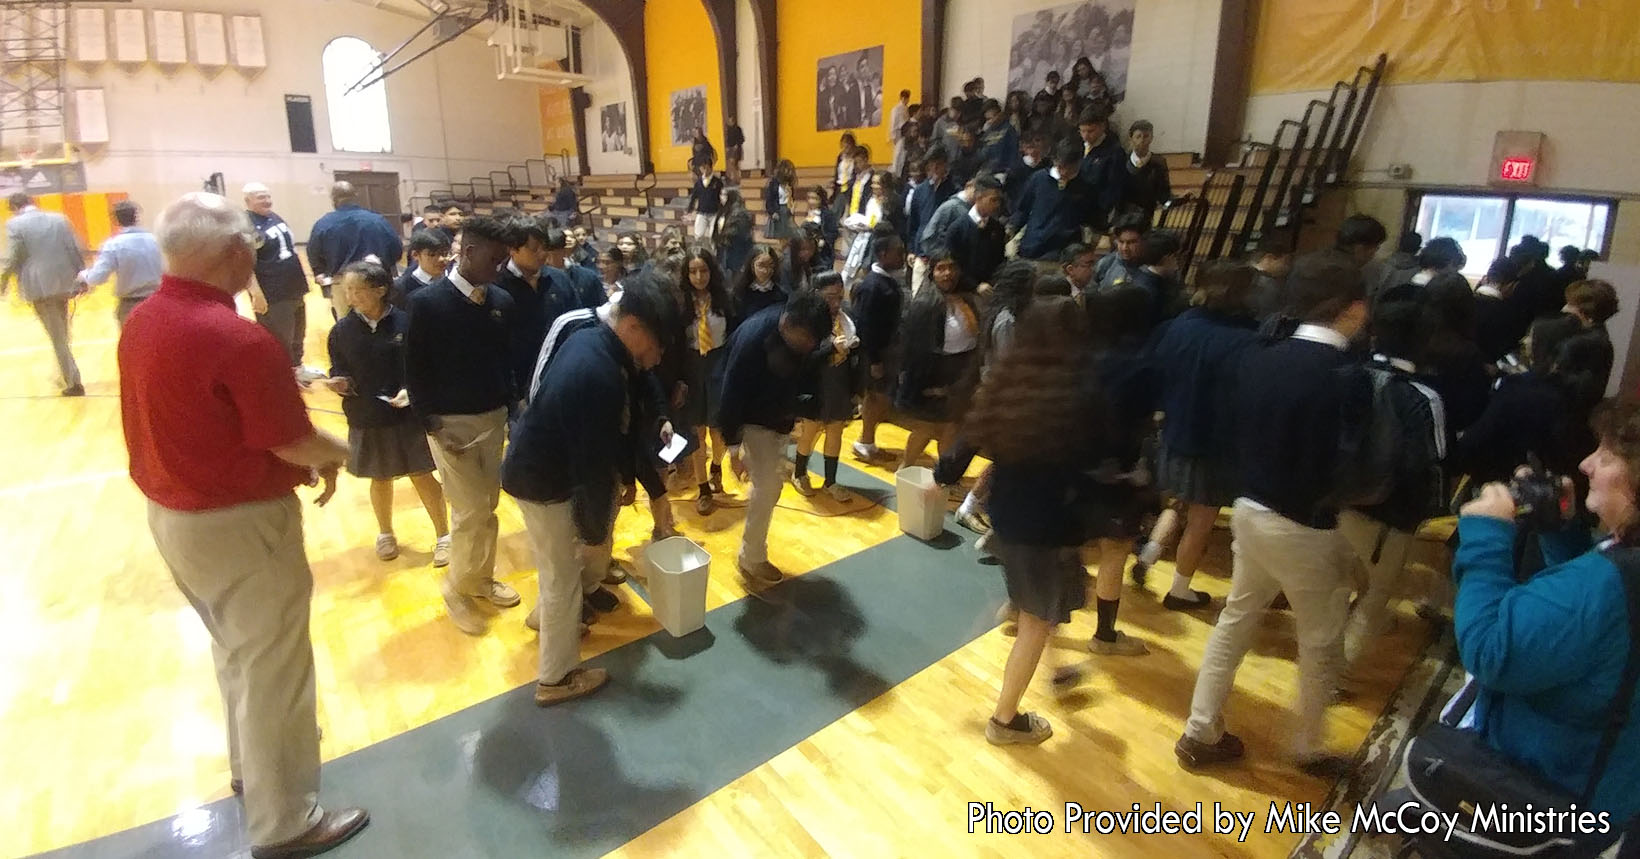 A group of young students are beginning to leave the bleachers after their assembly with Mike McCoy. Mike McCoy who is wearing his football jersey (left of the photo) was letting the students know how to face present and future challenges. Through faith, family, and friends, these students will be able to overcome any challenge.